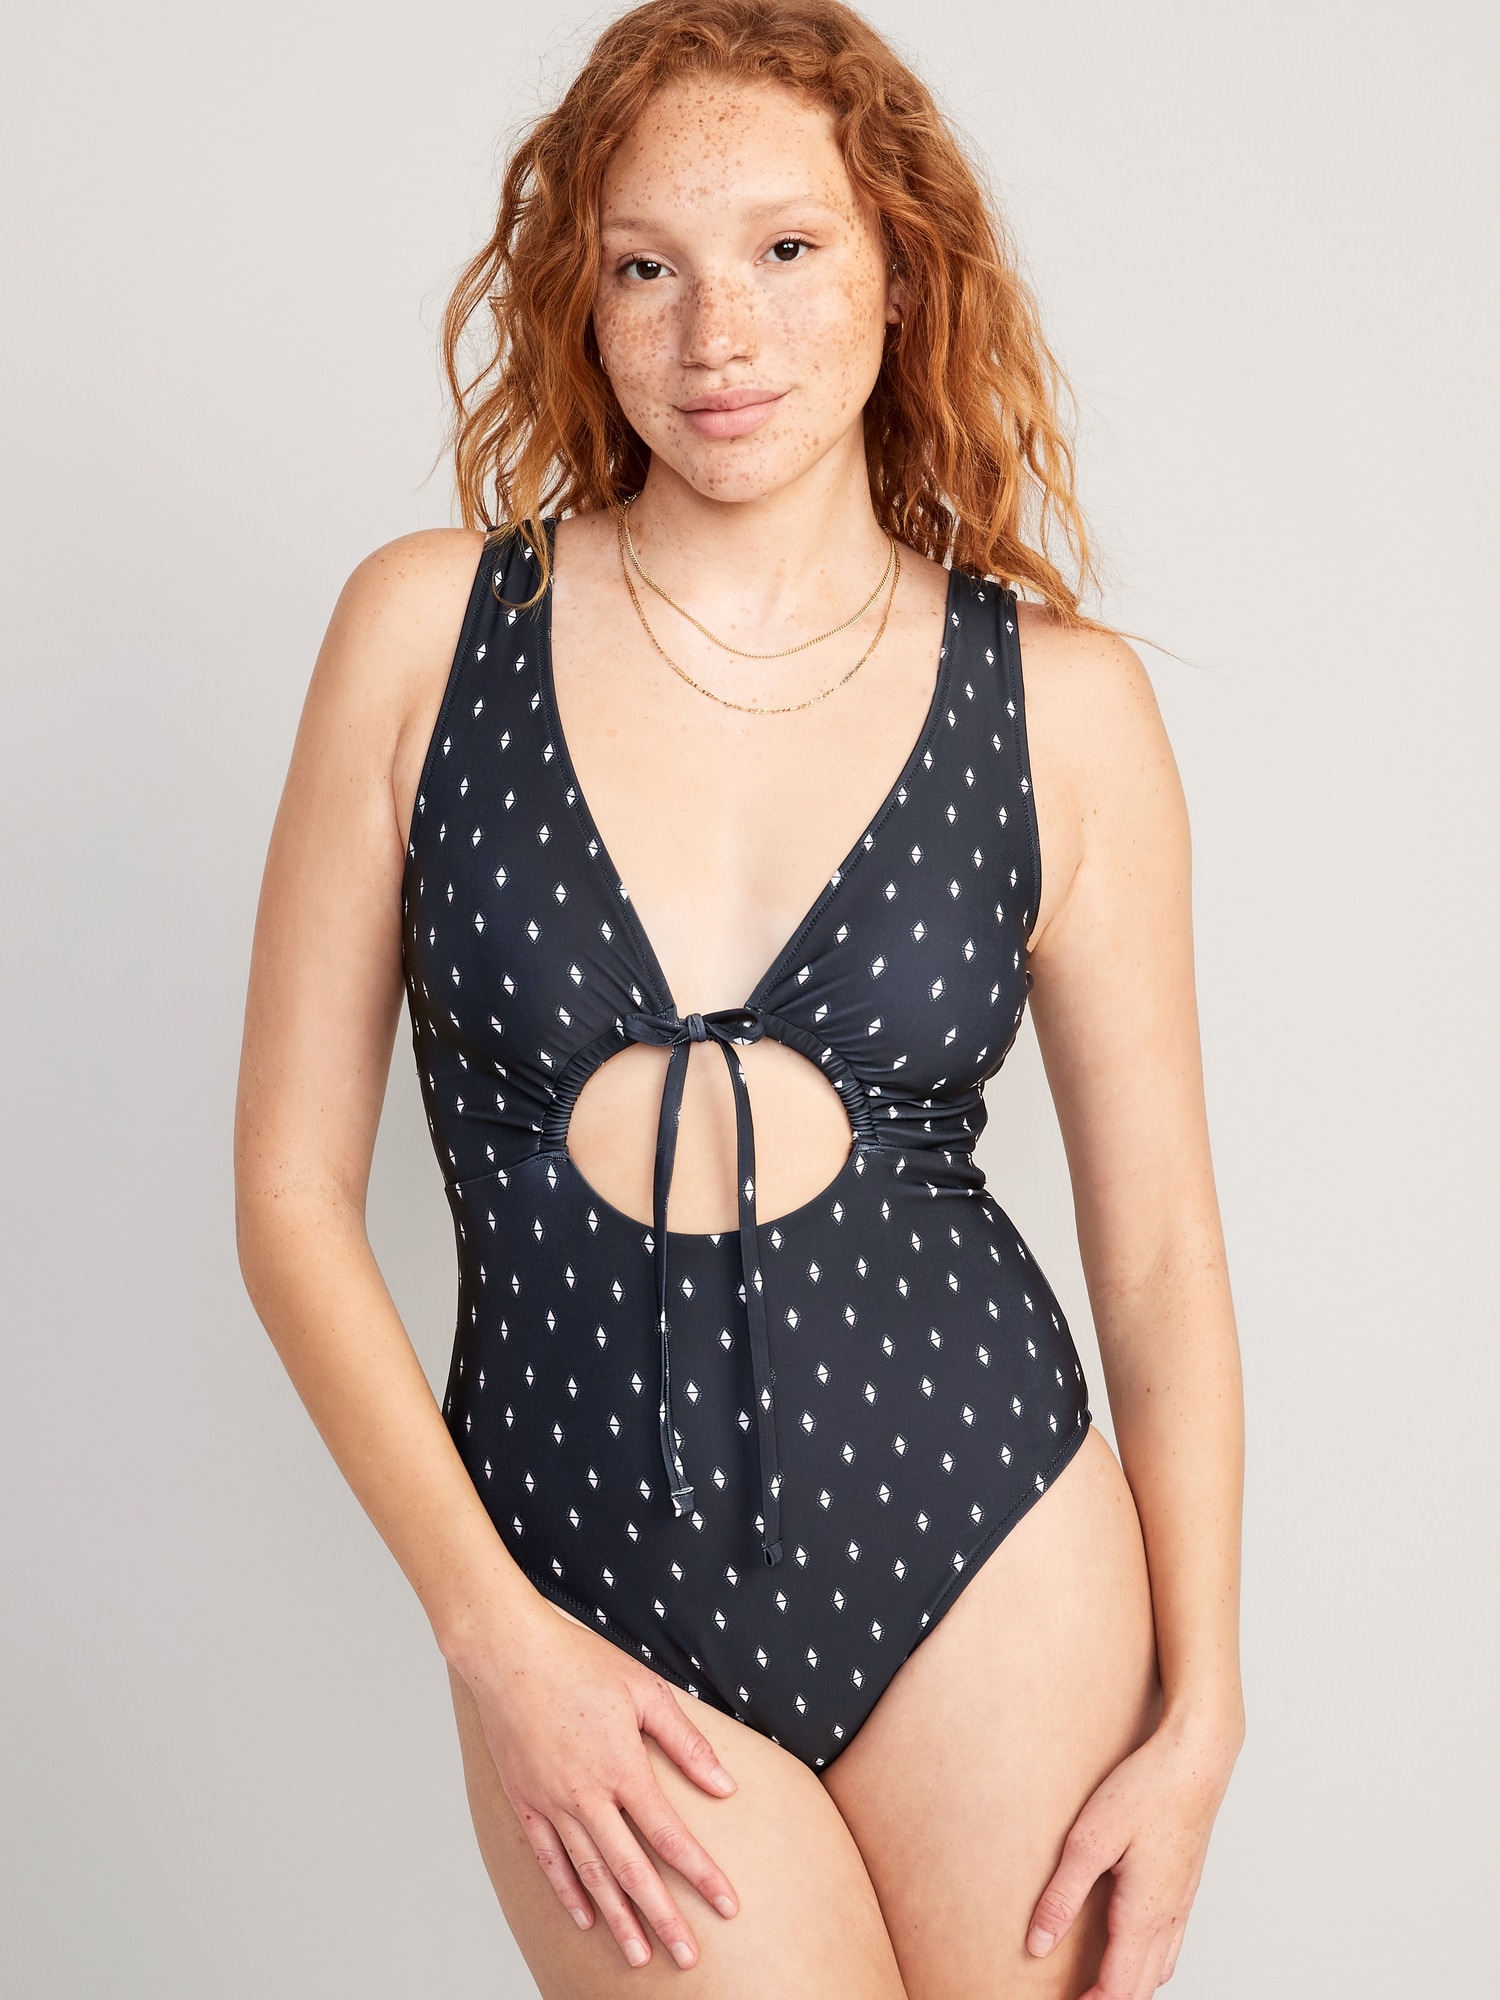 Matching V-Neck One-Piece Swimsuit for Women